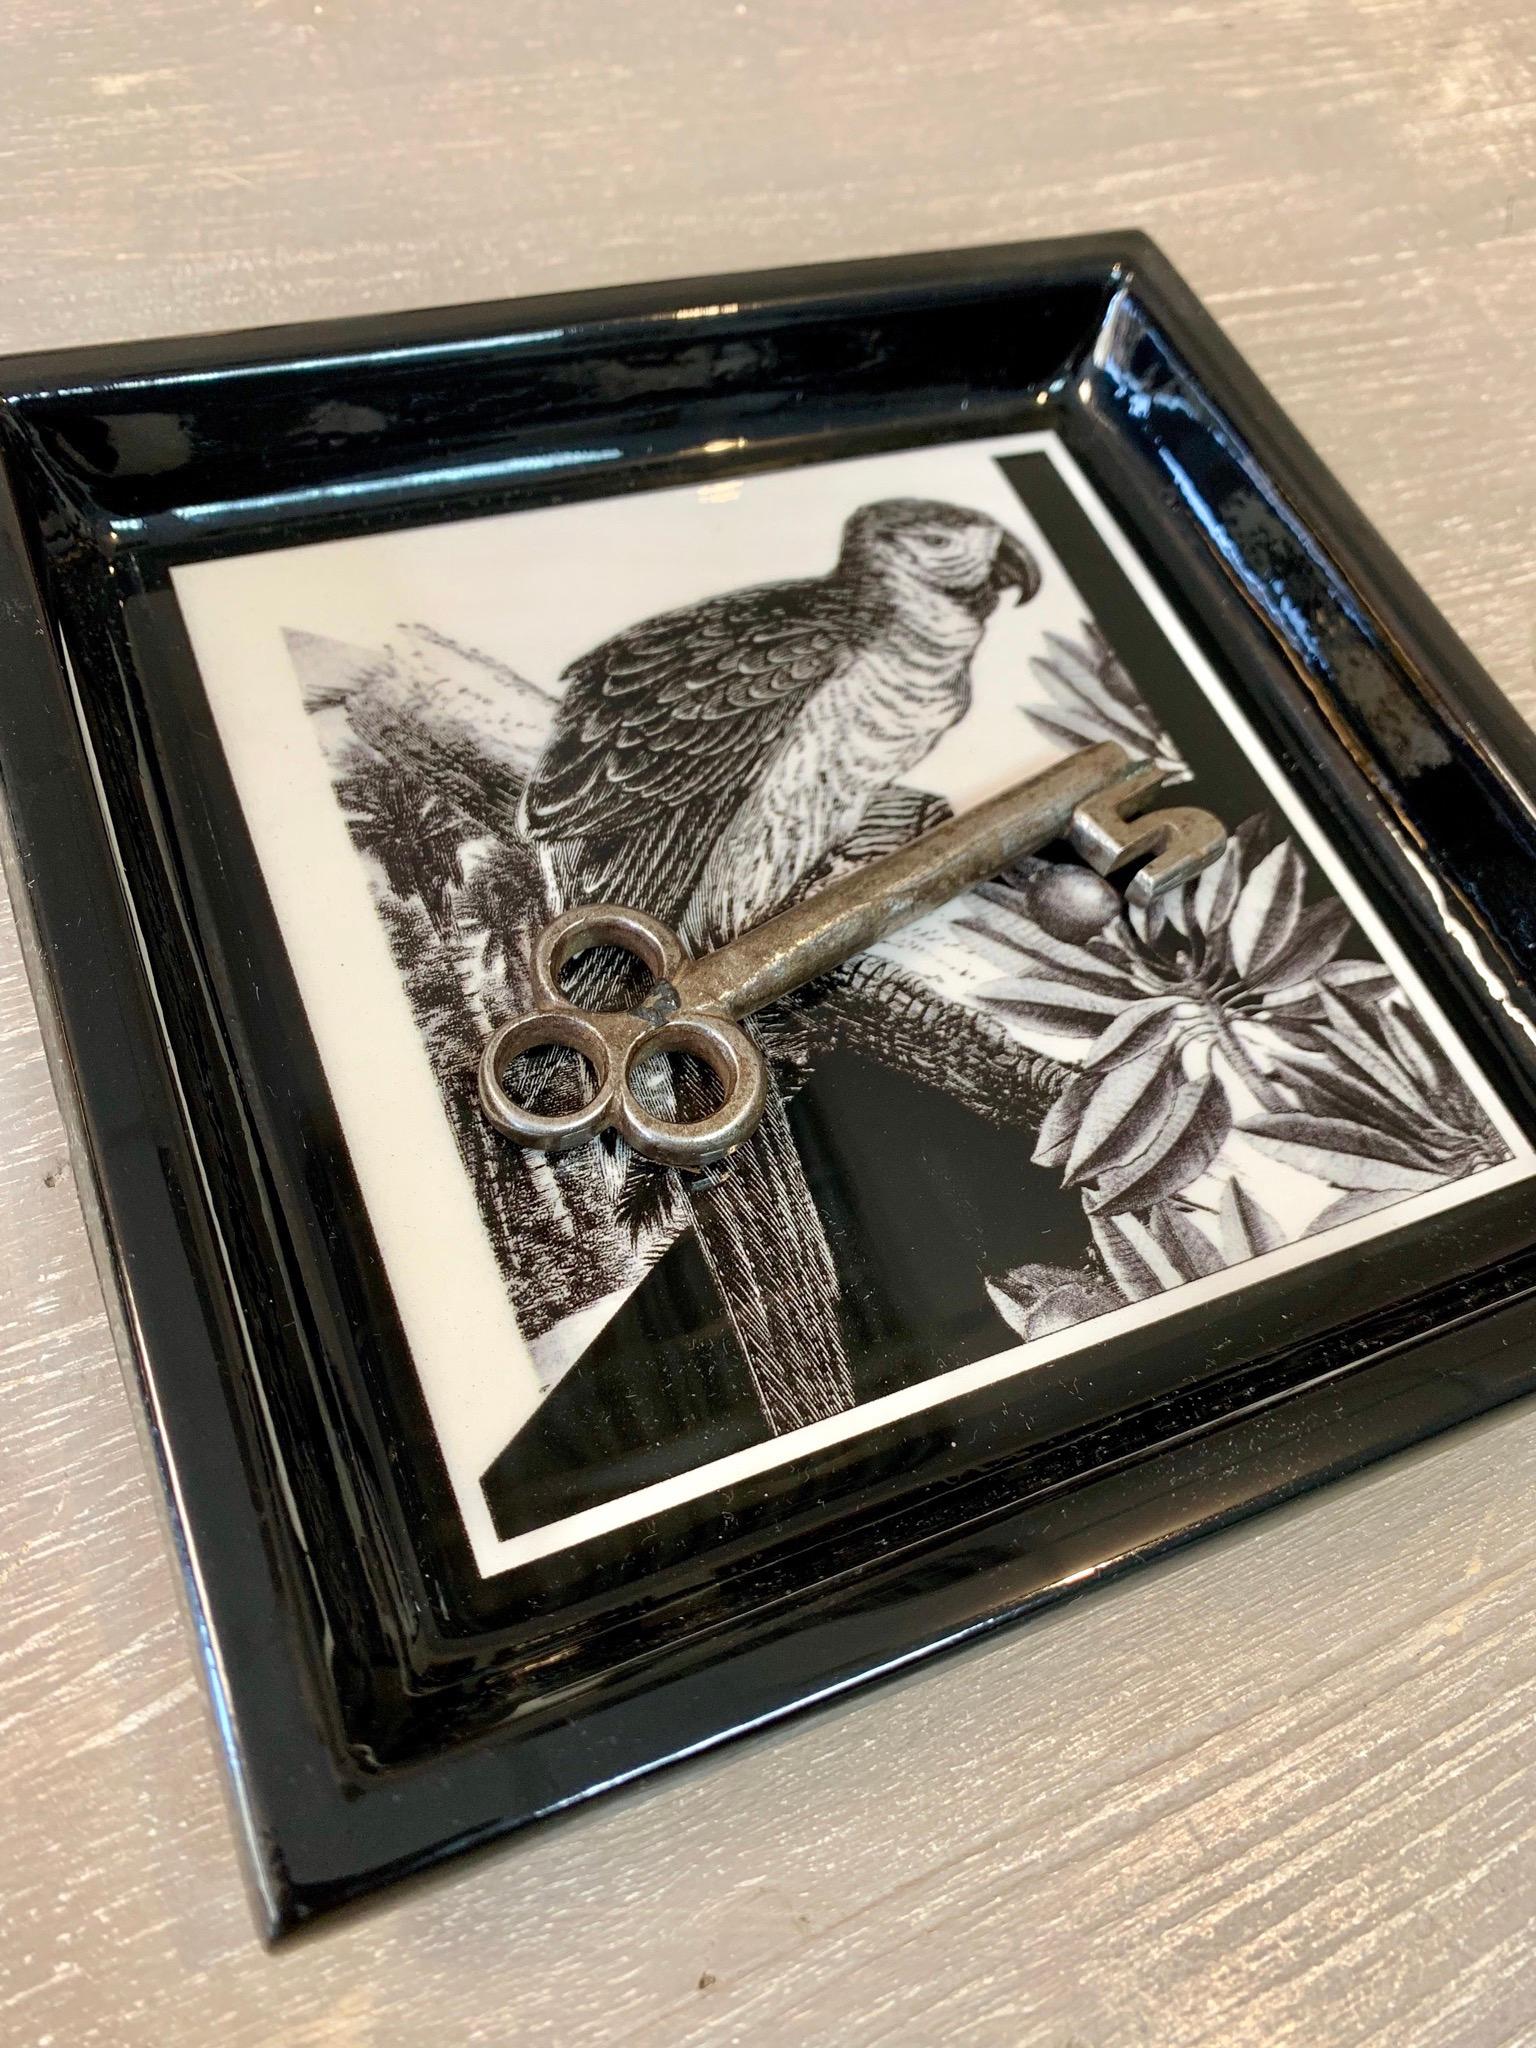 Elegant printed pocket tray portraying an exotic natural setting with a parrot on it. 

This object is part of a large collection called 